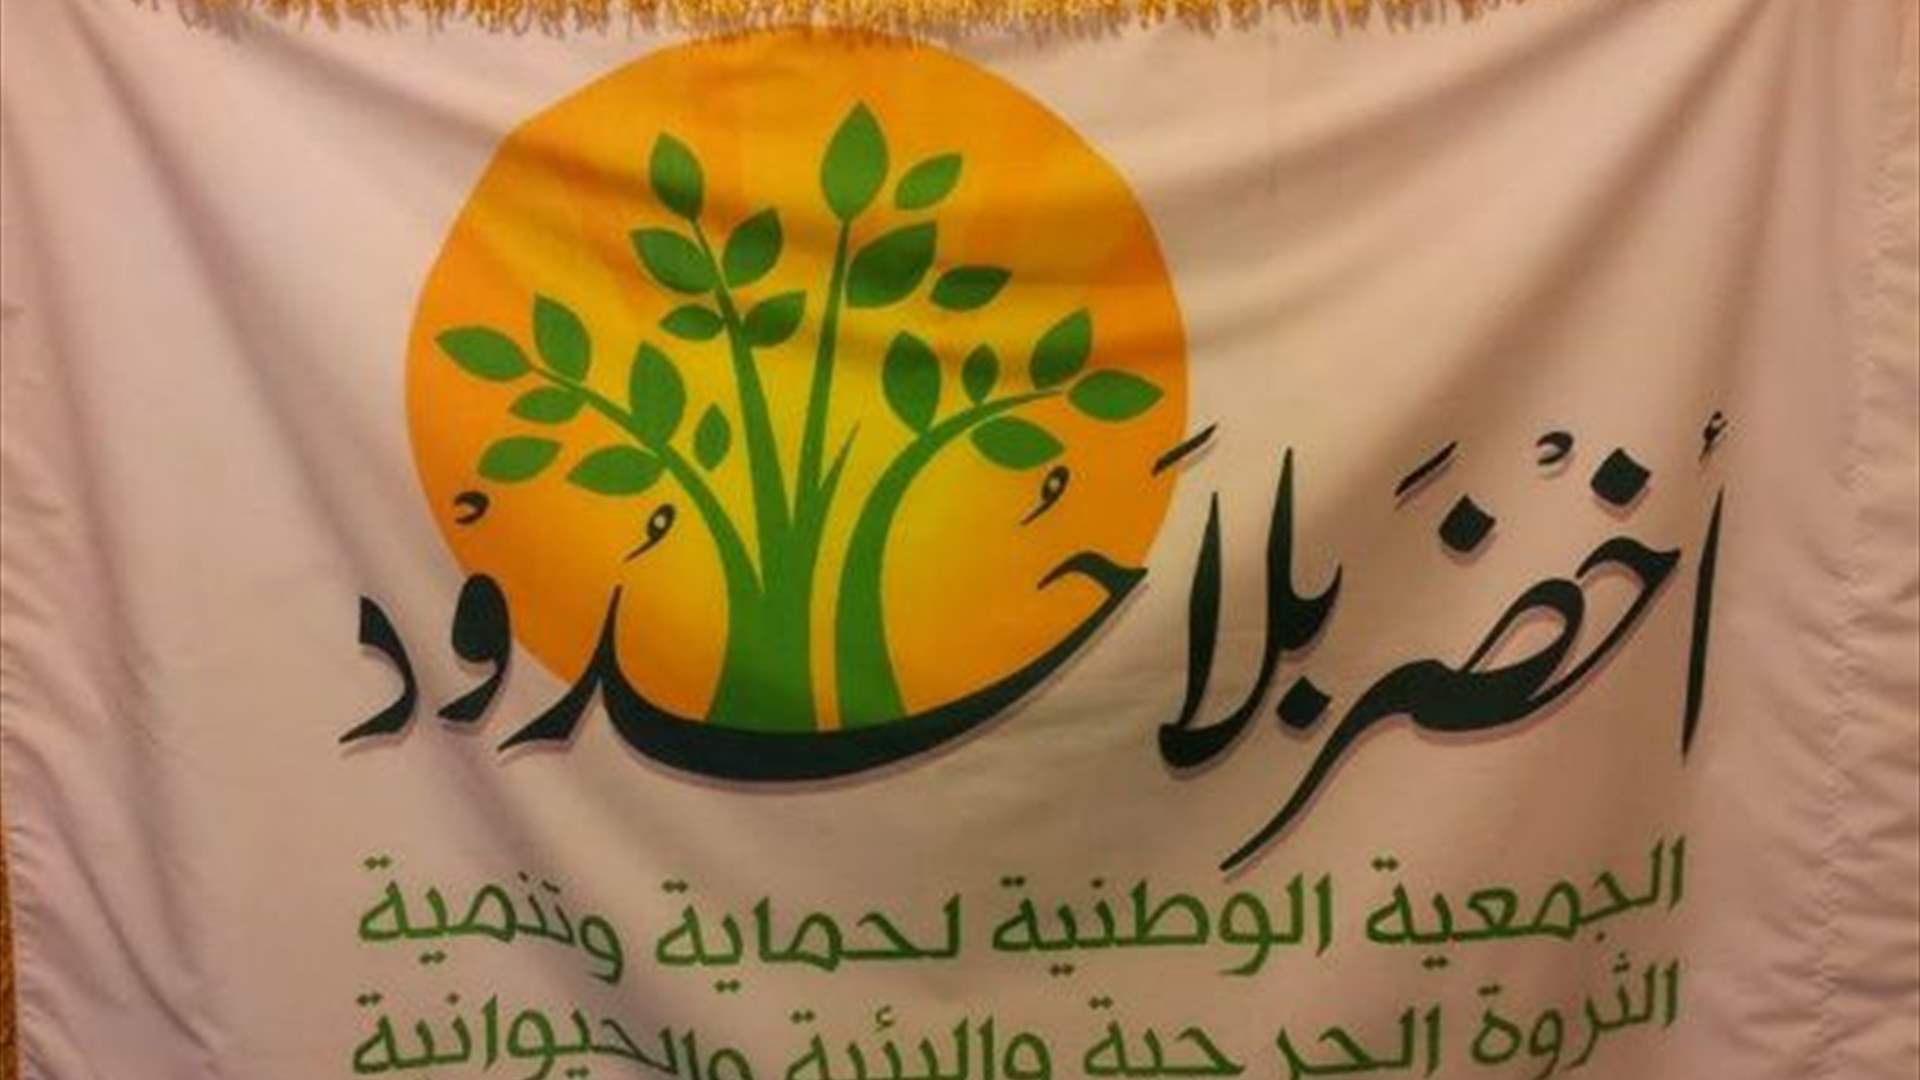 US Treasury Designates Lebanese Environmental Organization, Green Without Borders, for Concealed Hezbollah Ties